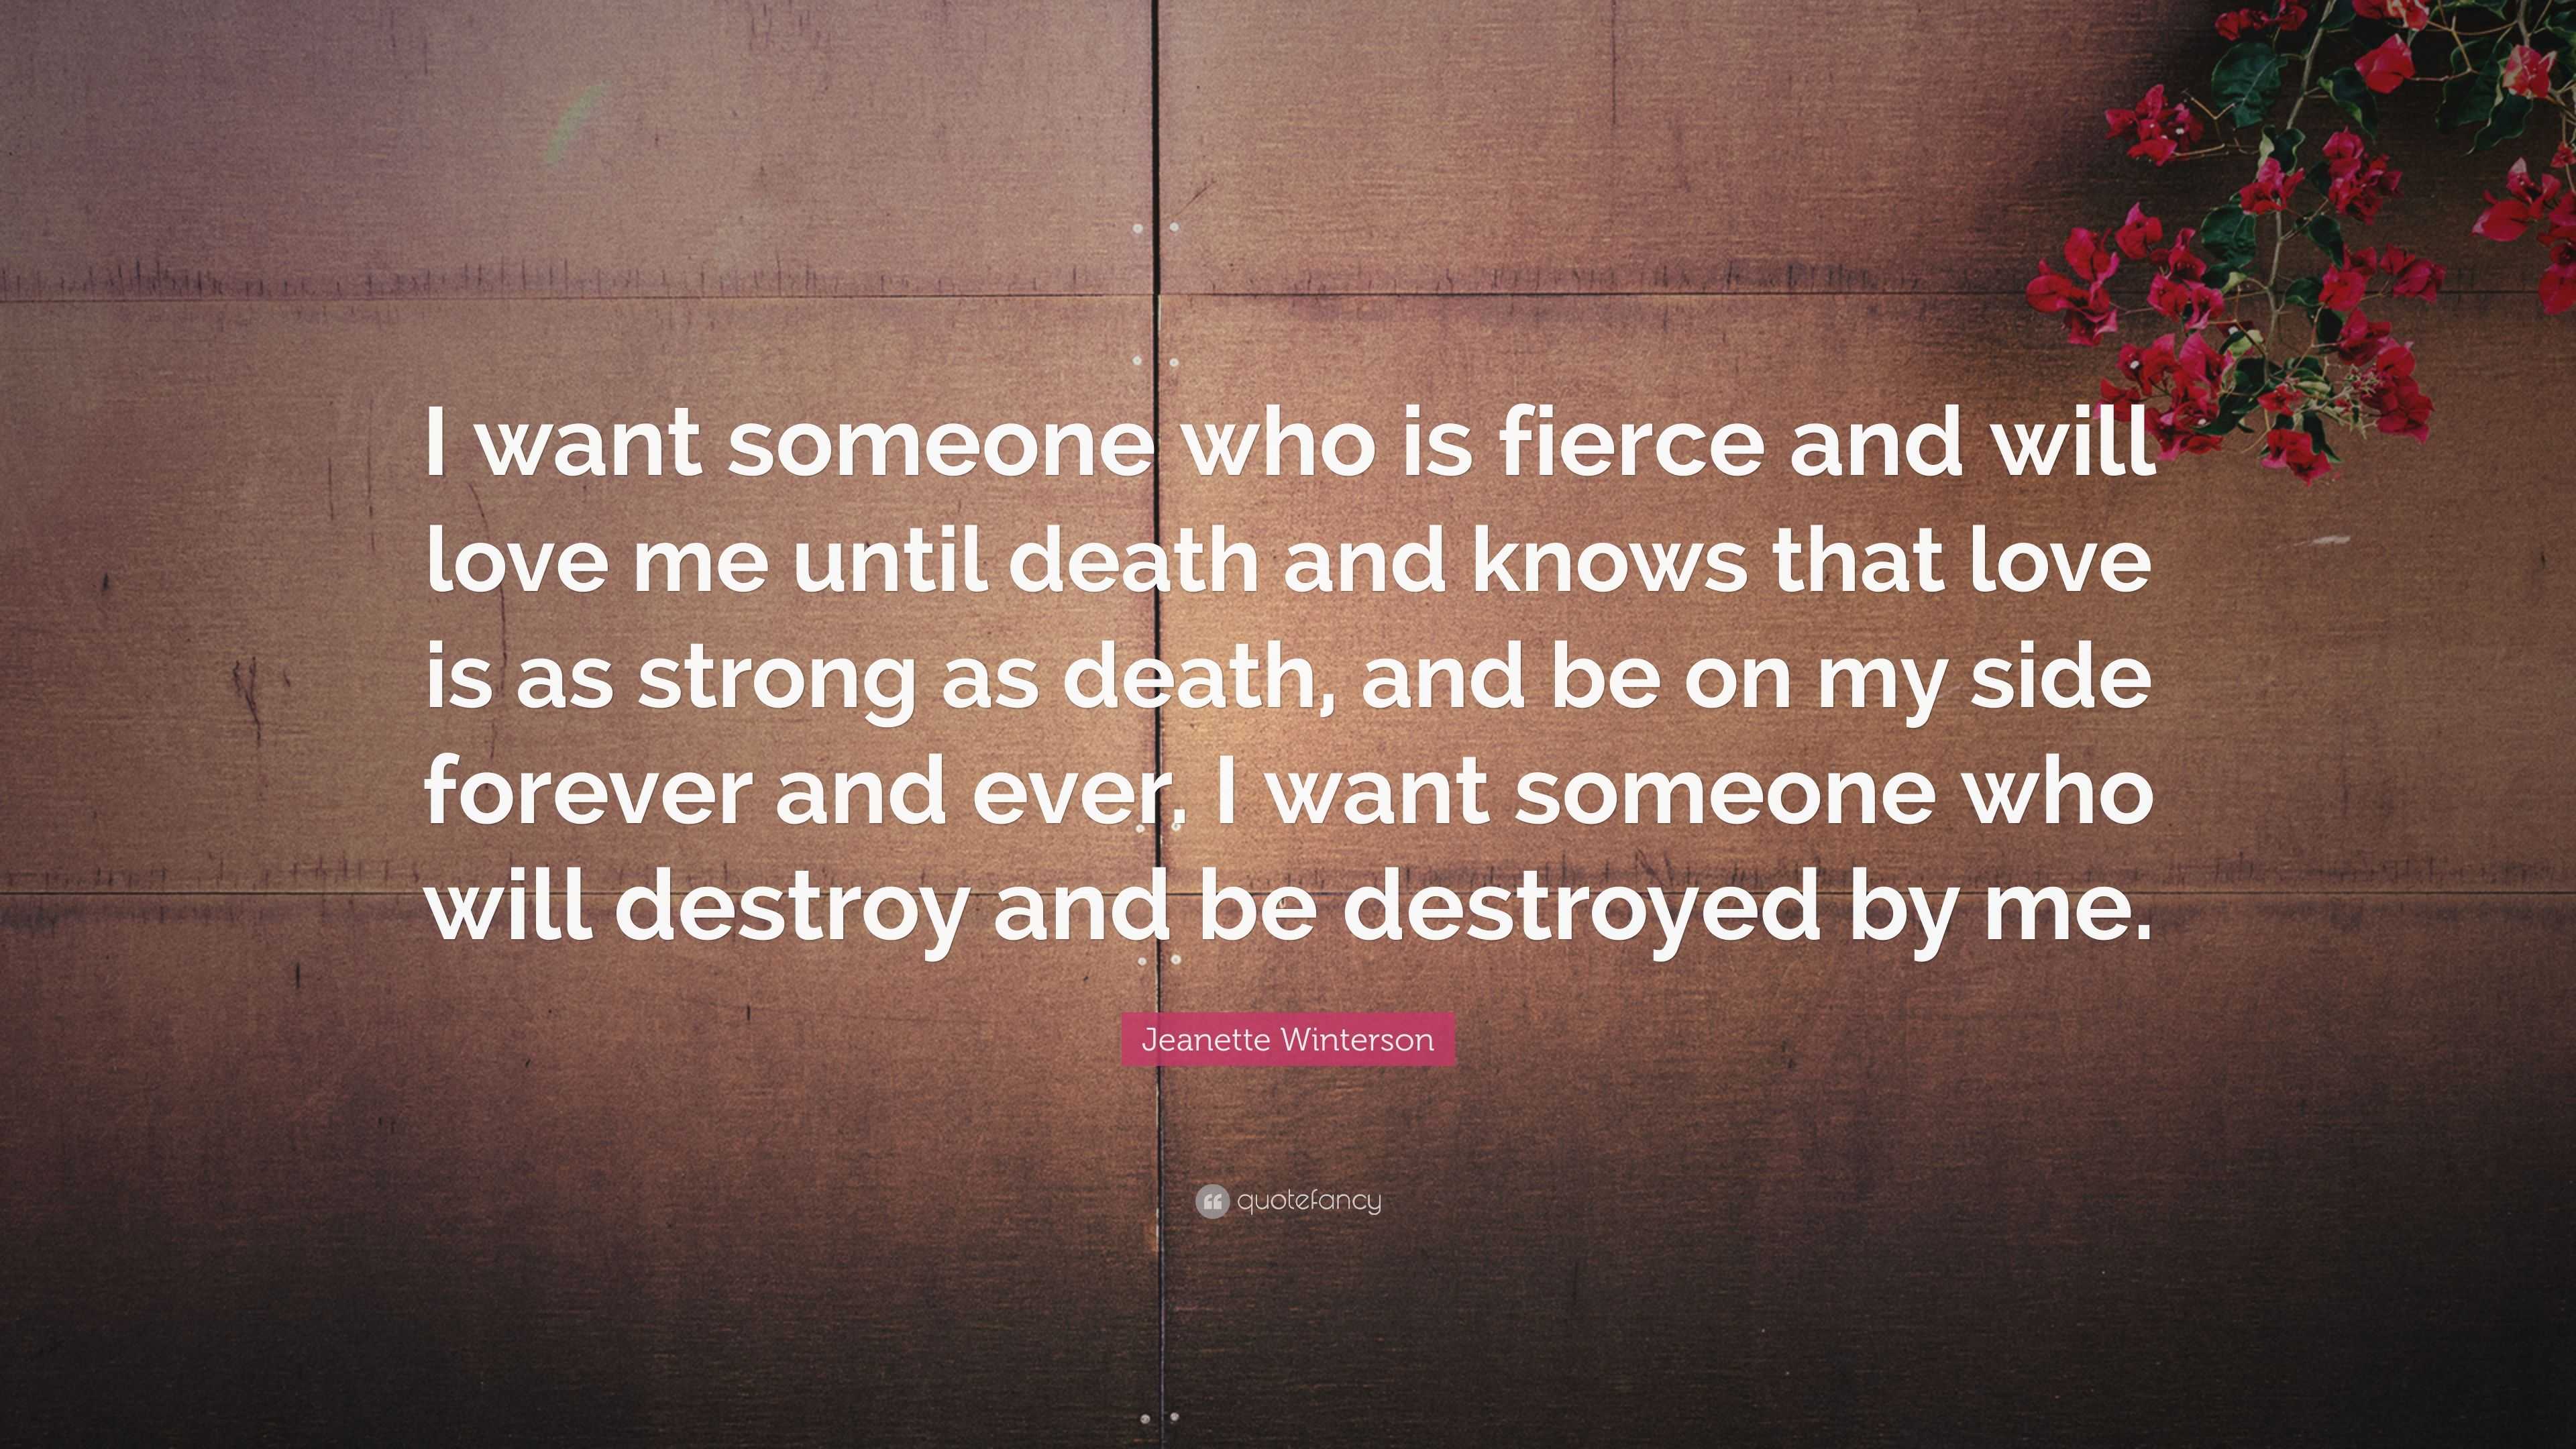 Jeanette Winterson Quote “I want someone who is fierce and will love me until